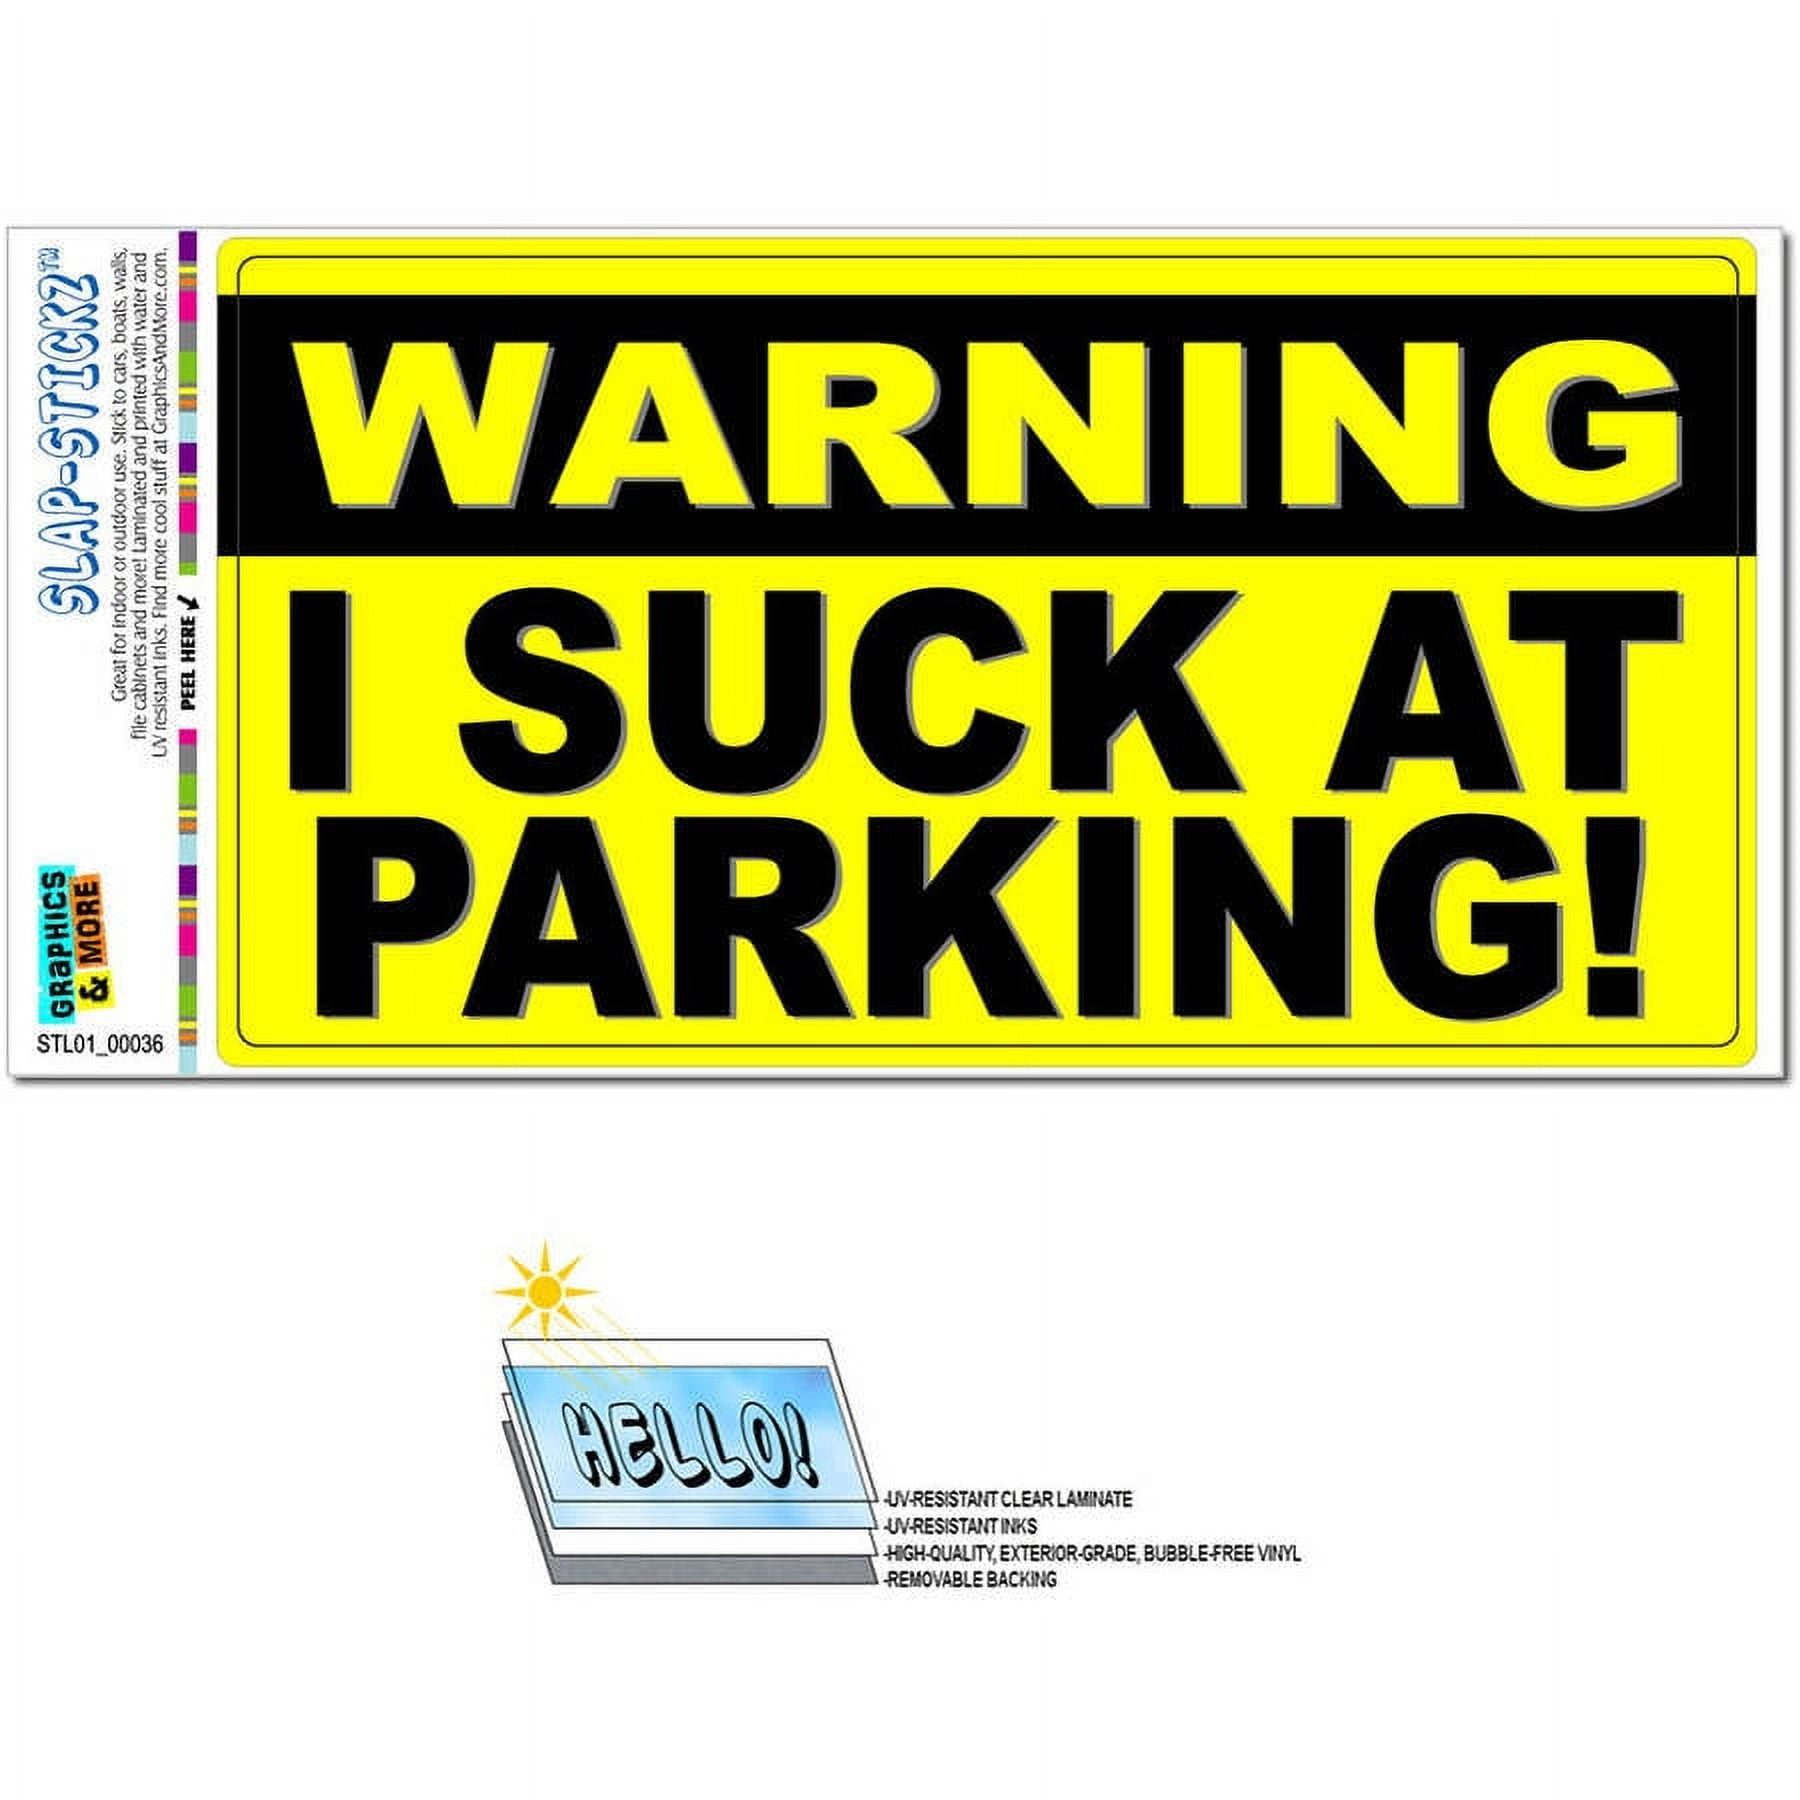  Dsoluuing Prank Stickers Kira'S Parking Only Funny